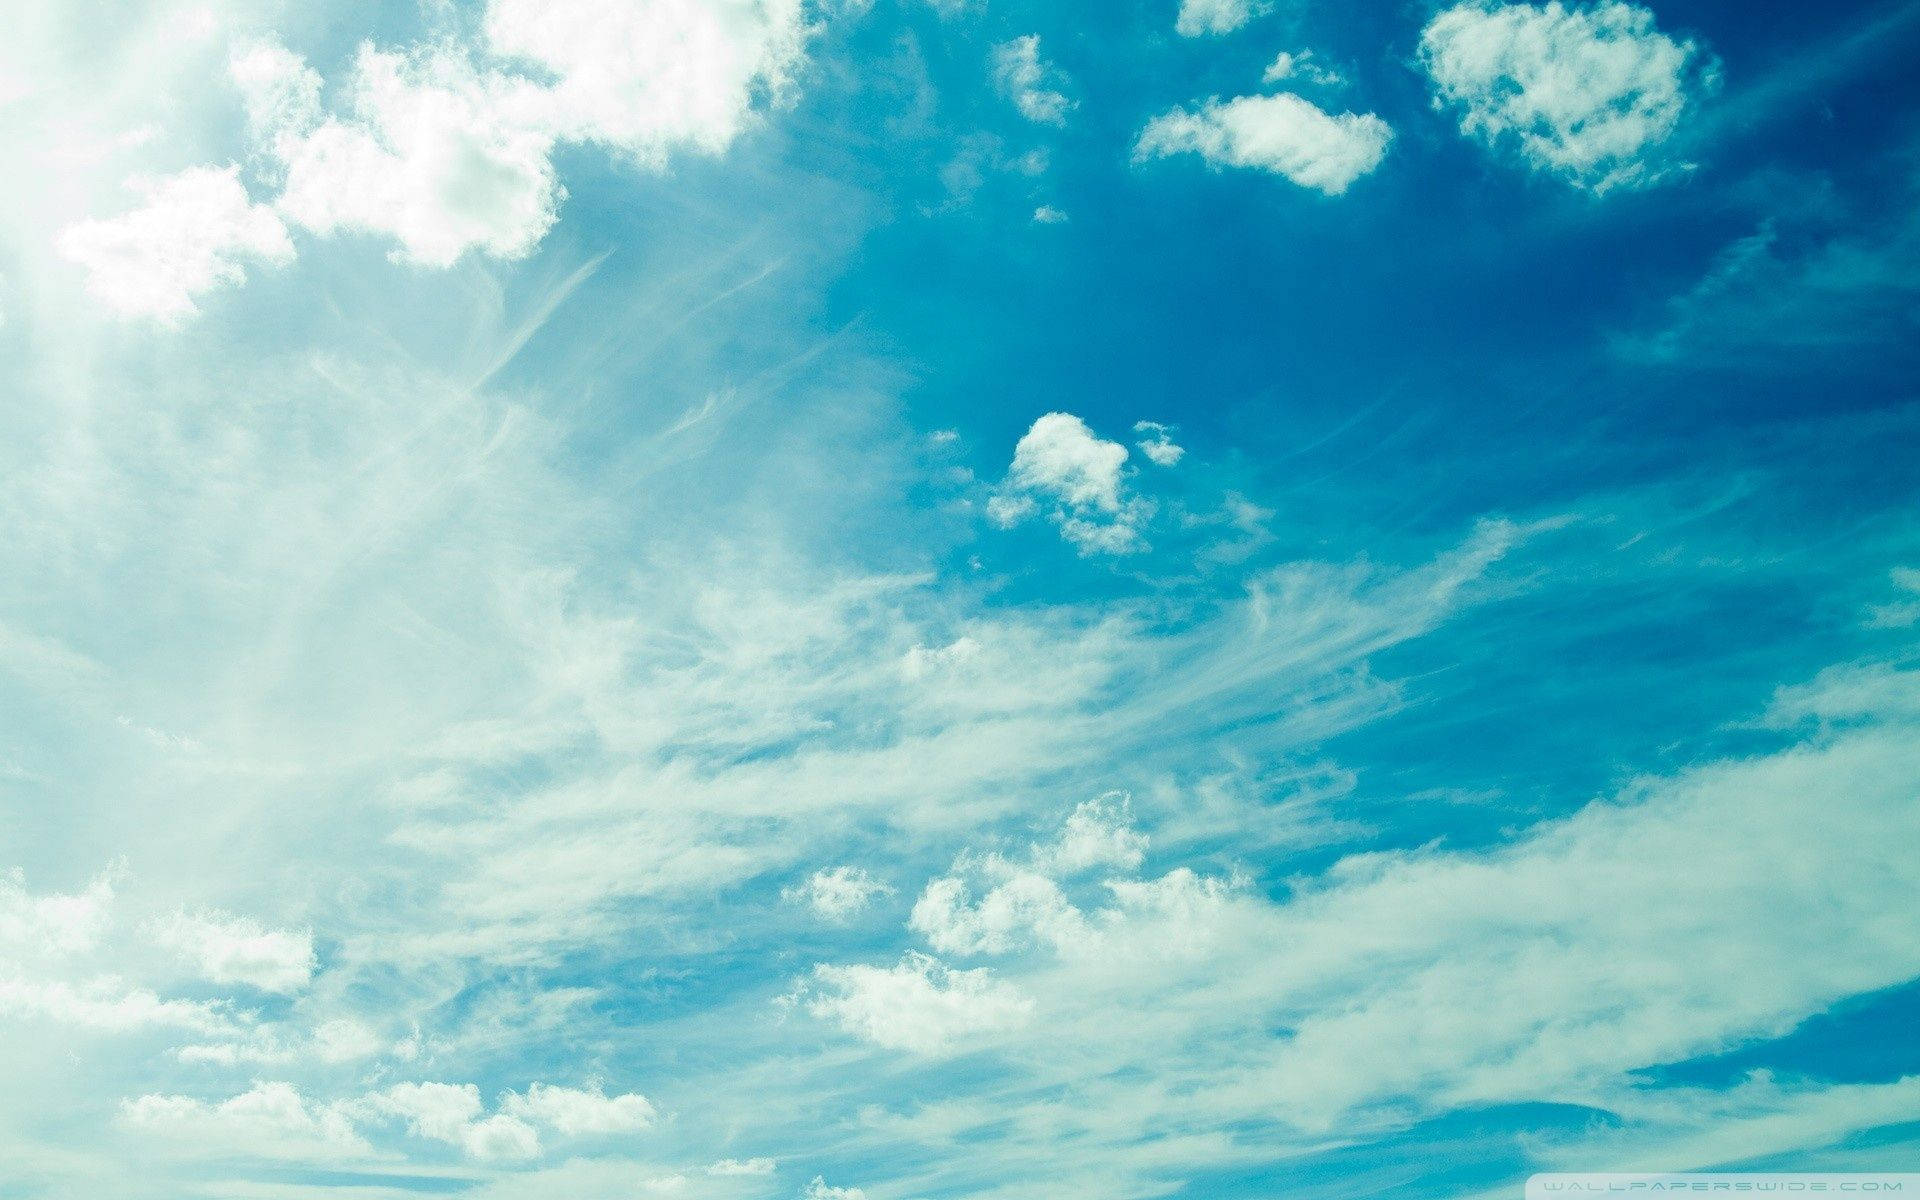 "The Majestic Whispers of the Cirrostratus: A Blue Aesthetic Cloud" Wallpaper